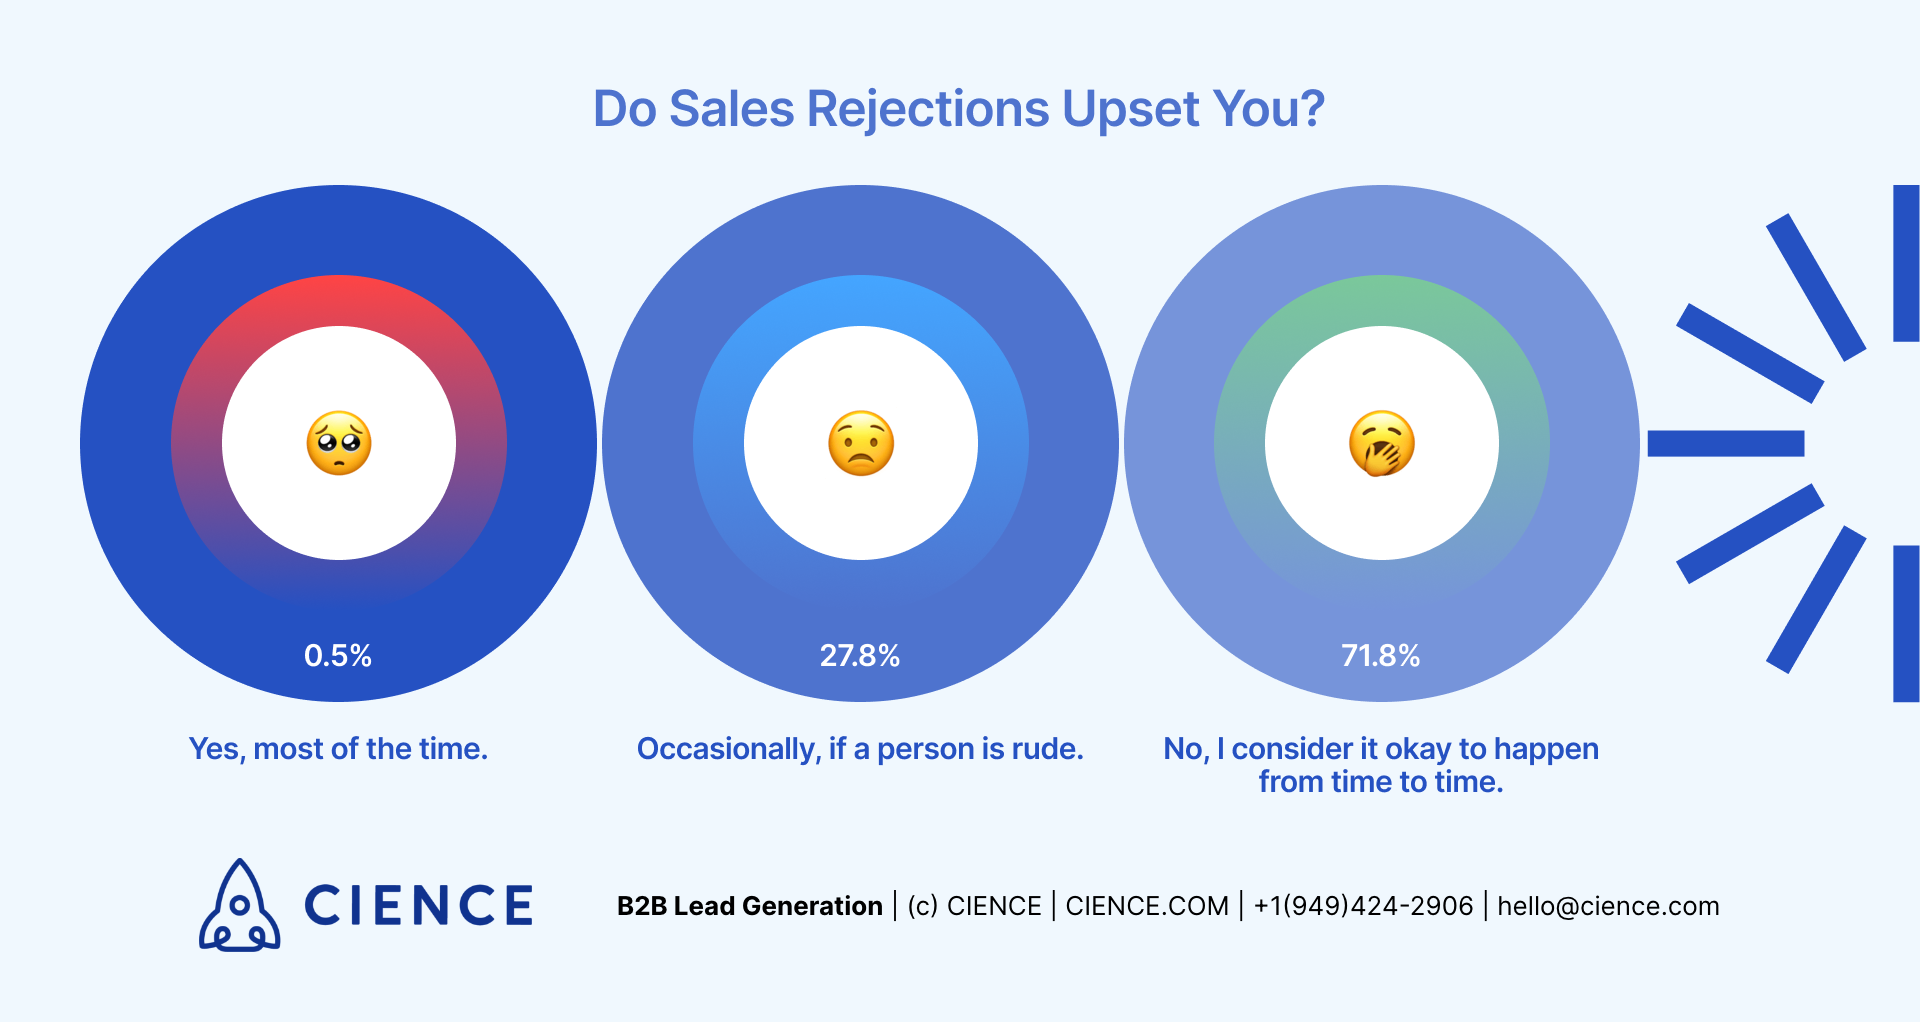 Percentage of SDRs Upset by Sales Rejections